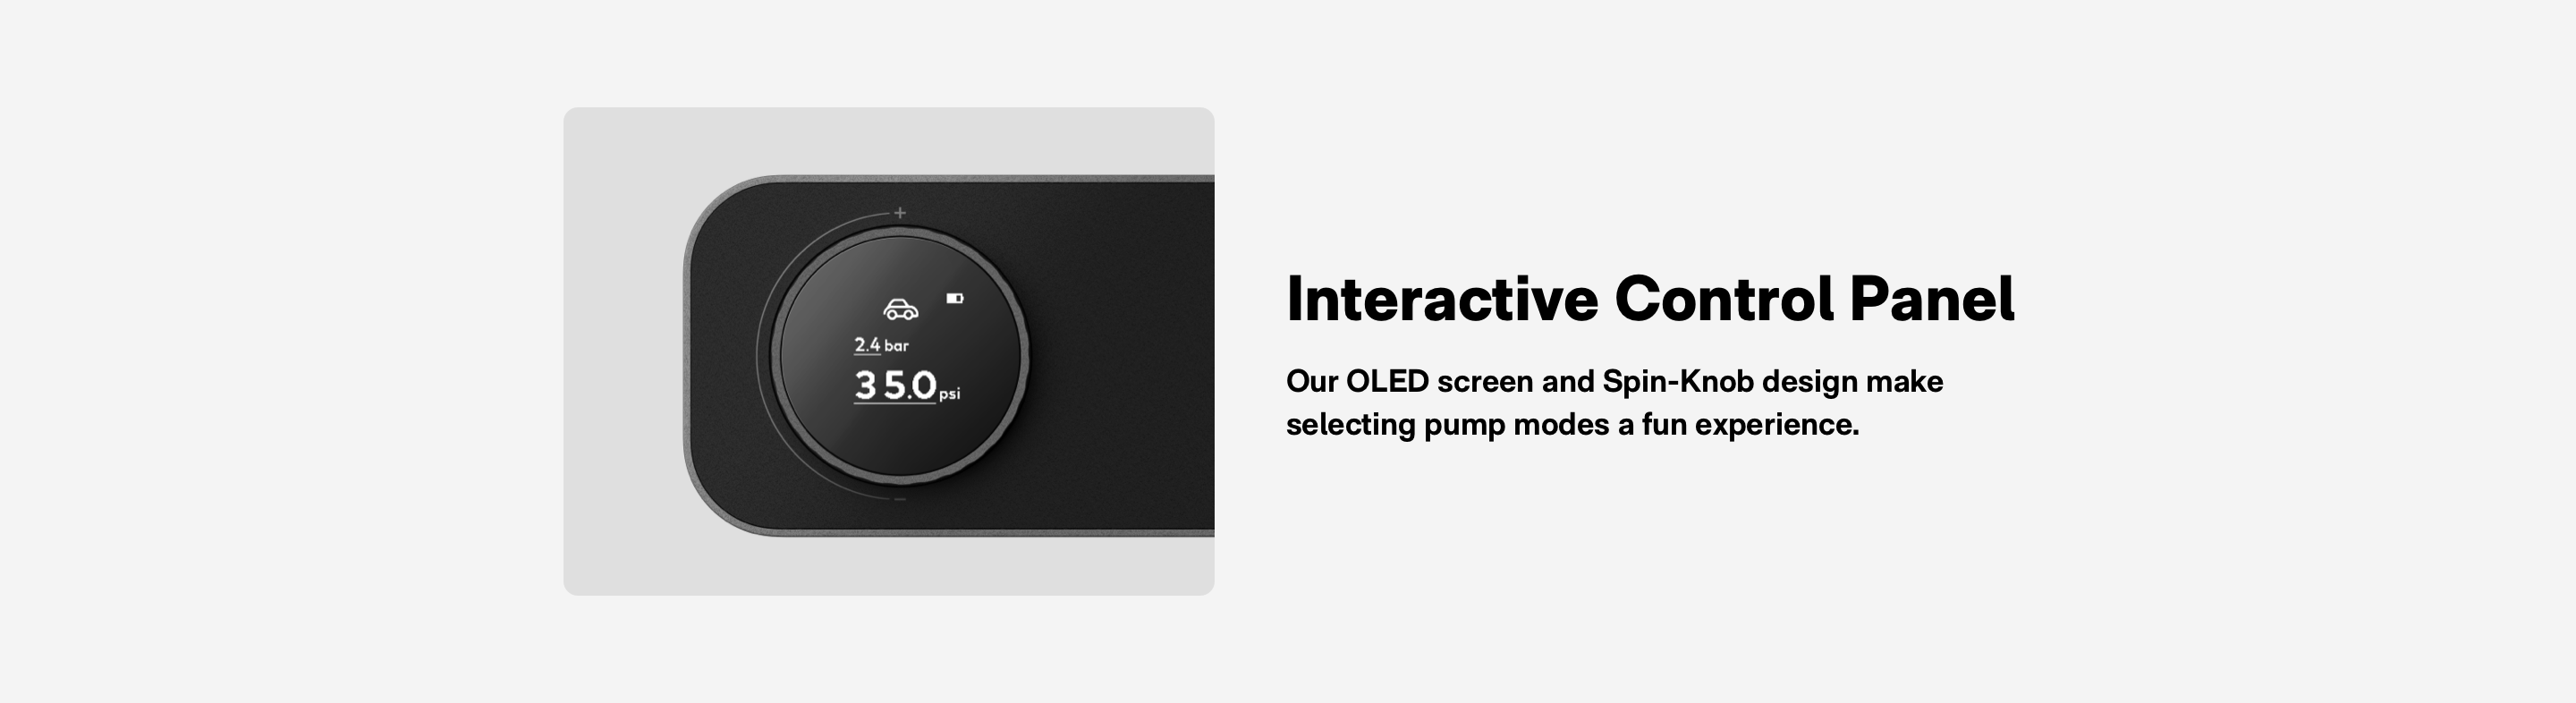 lnteractive Control Panel：Our OLED screen and Spin-Knob design make selecting pump modes a fun experience.